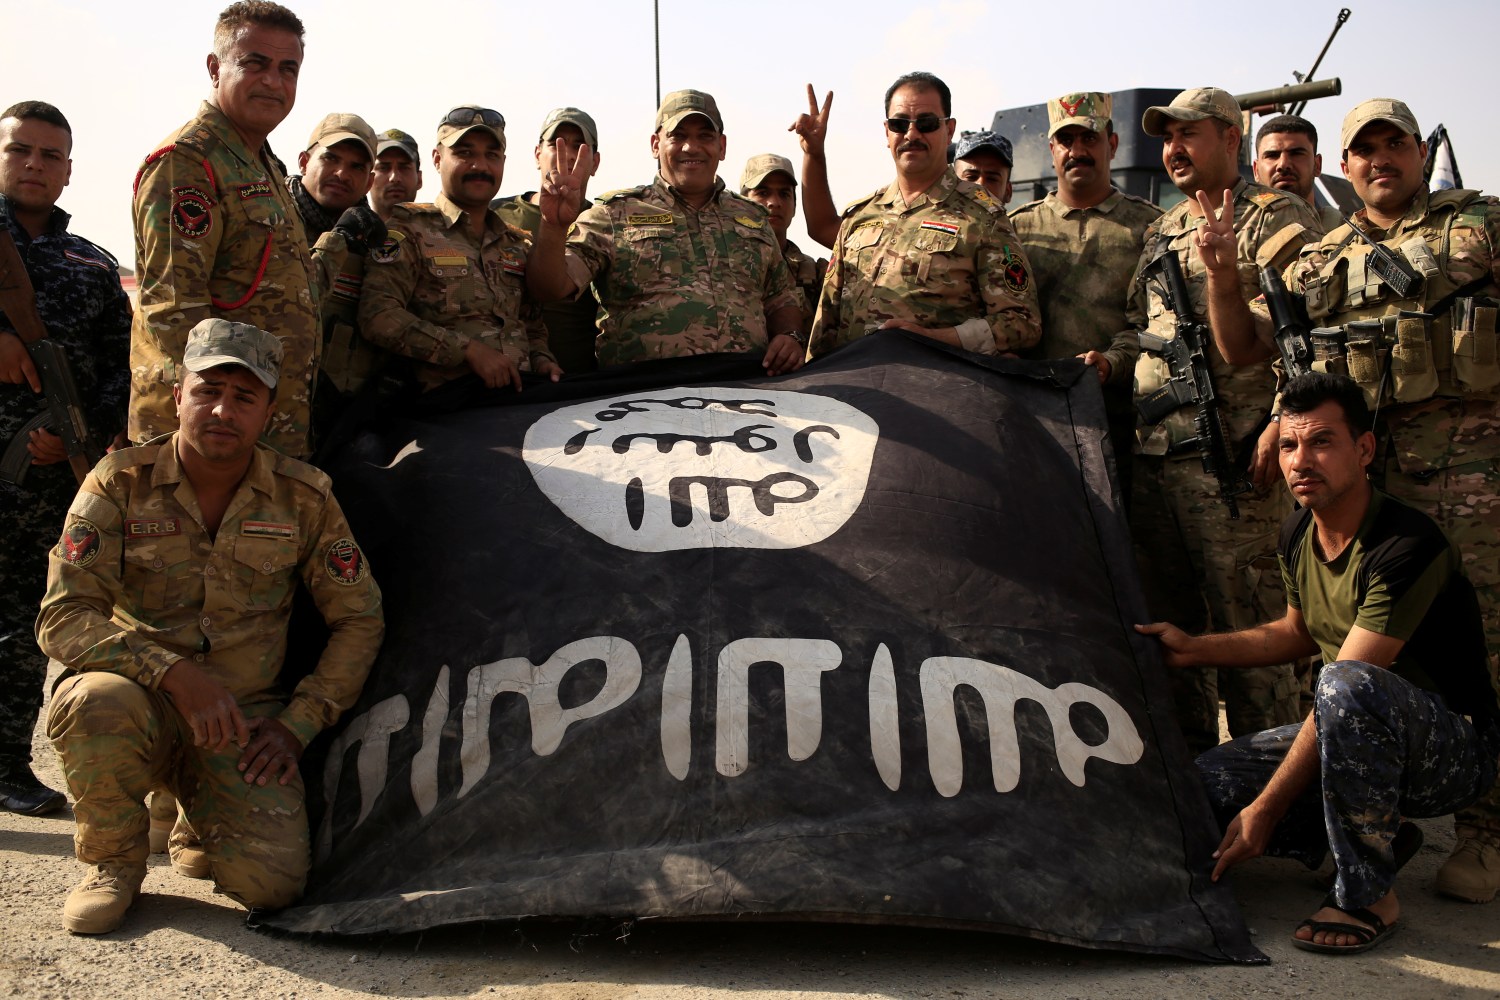 Iraqi soldiers celebrate as they pose with the Islamic State flag along a street of the town of al-Shura, which was recaptured from Islamic State (IS) on Saturday, south of Mosul, Iraq October 30, 2016. REUTERS/Zohra Bensemra - RTX2R34S